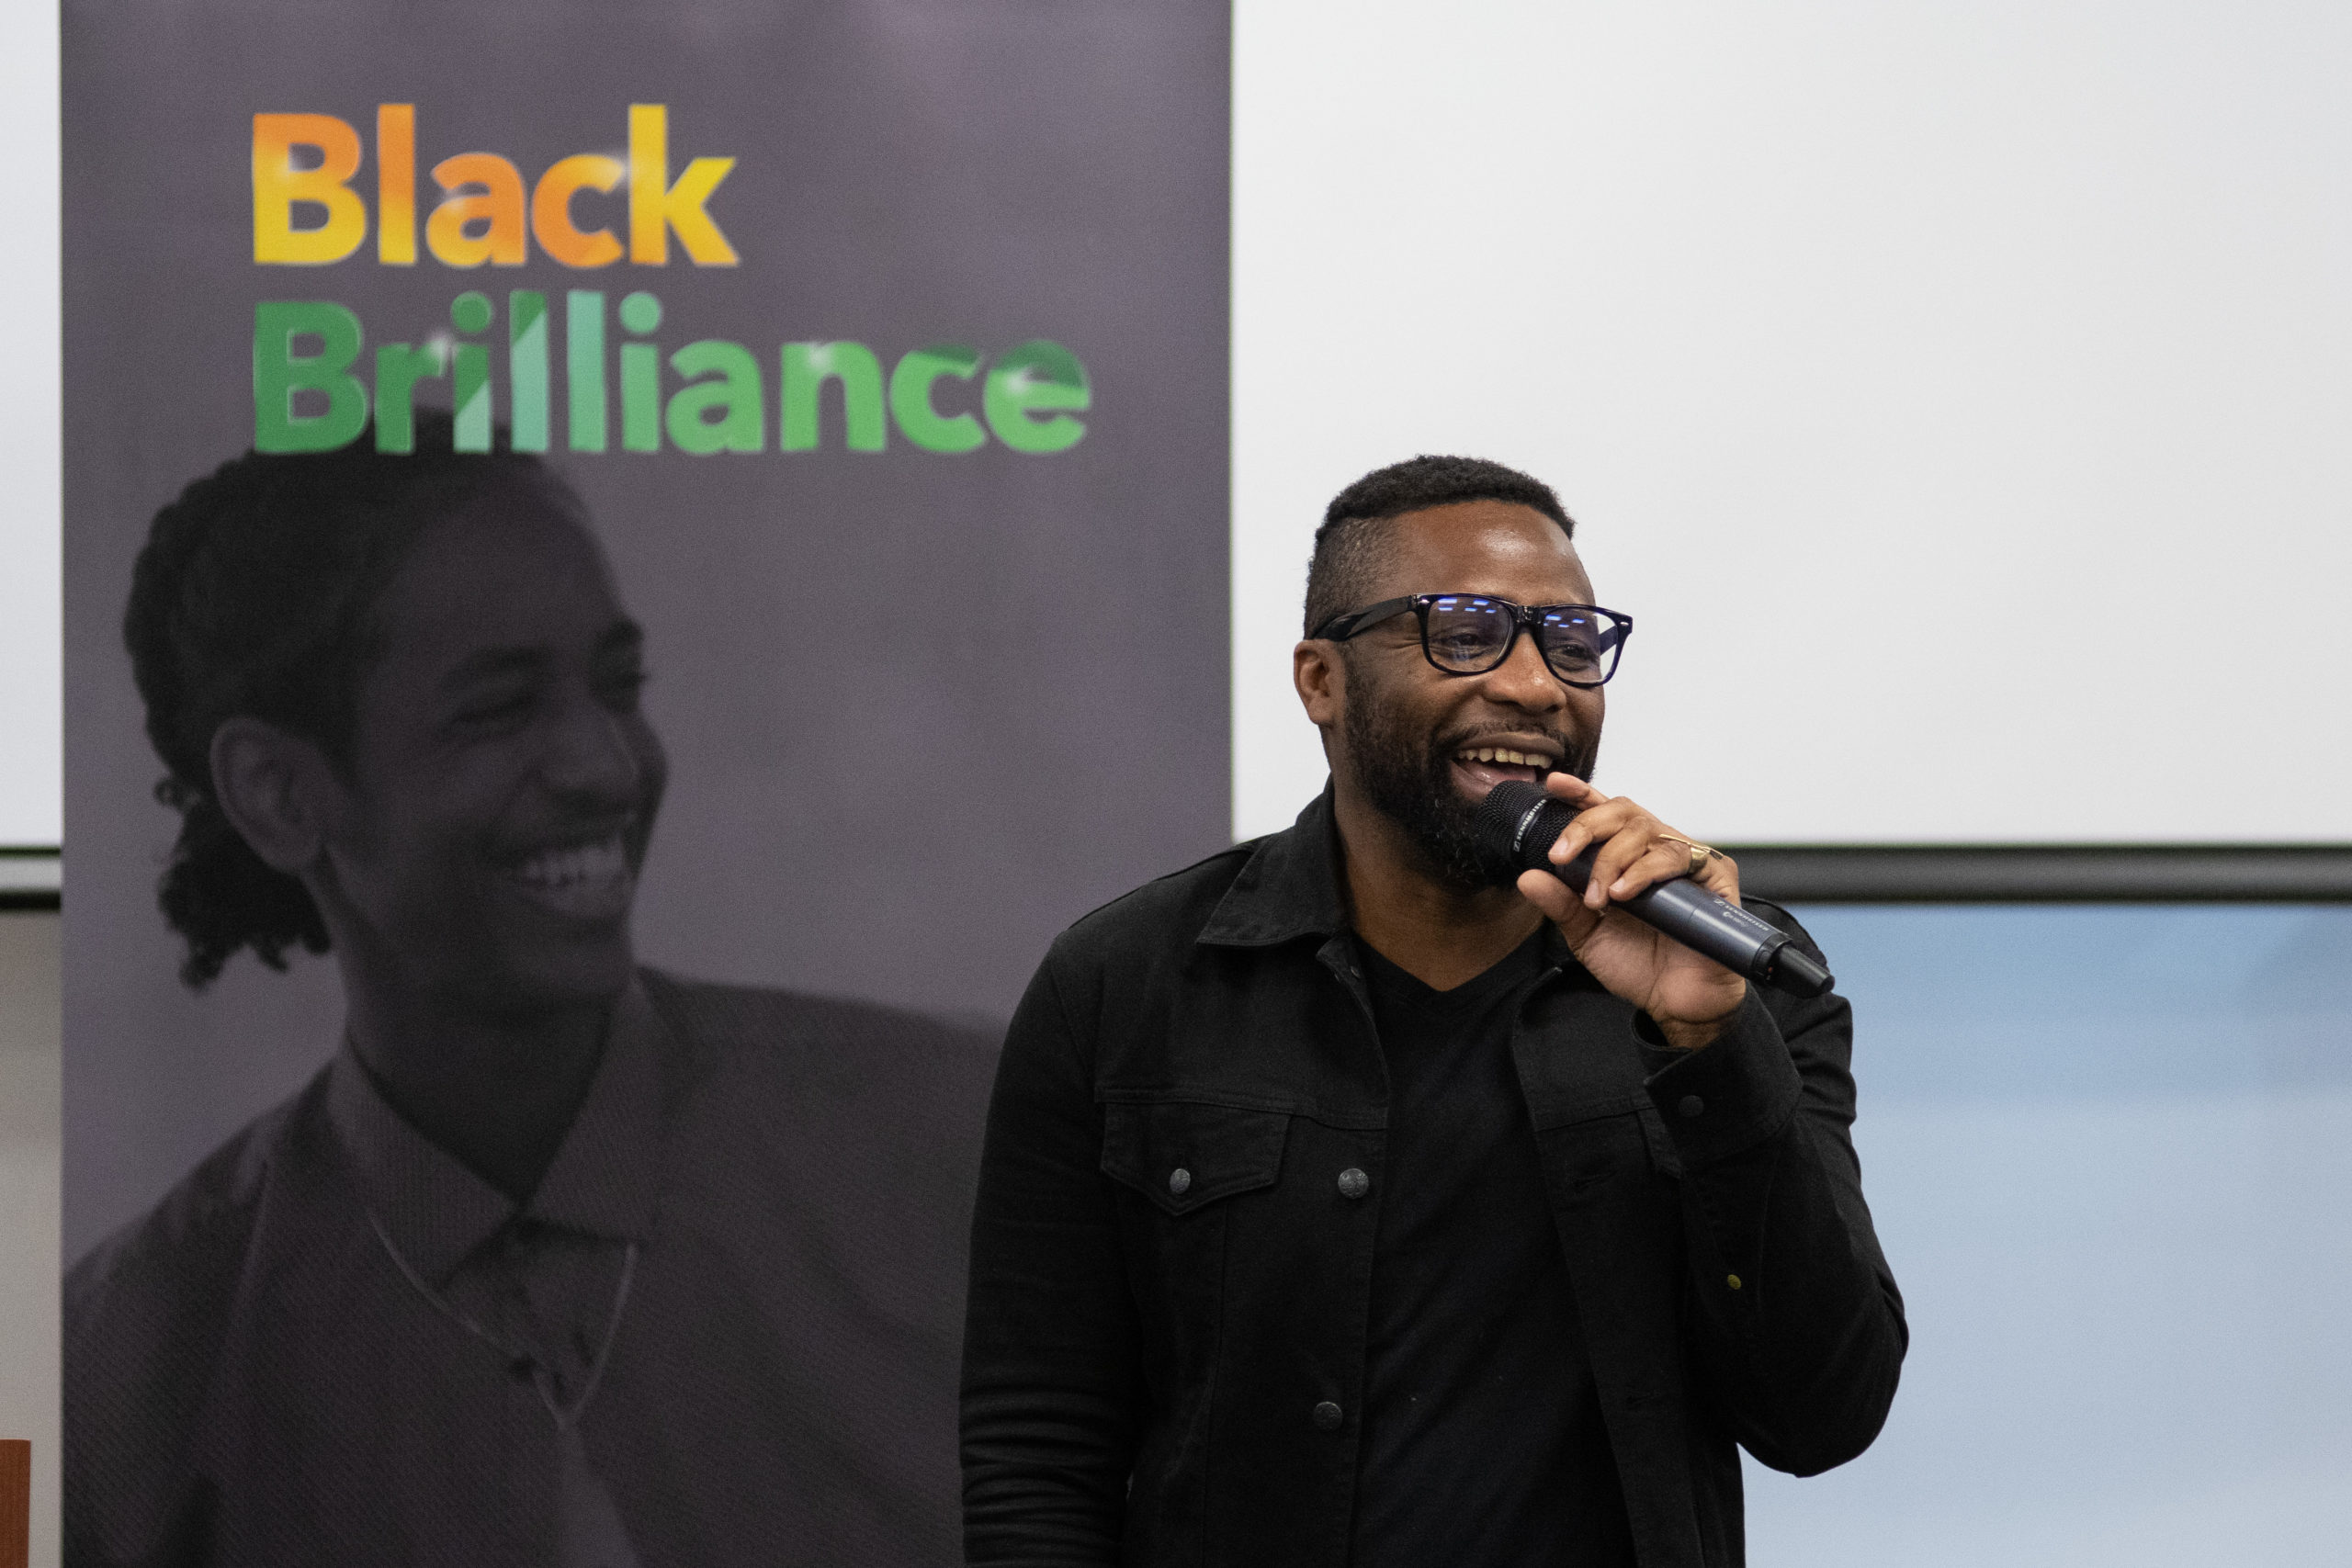 Antonio Michael Downing speaks to students at the Black Brilliance Conference in front of a banner that reads "Black Brilliance". 